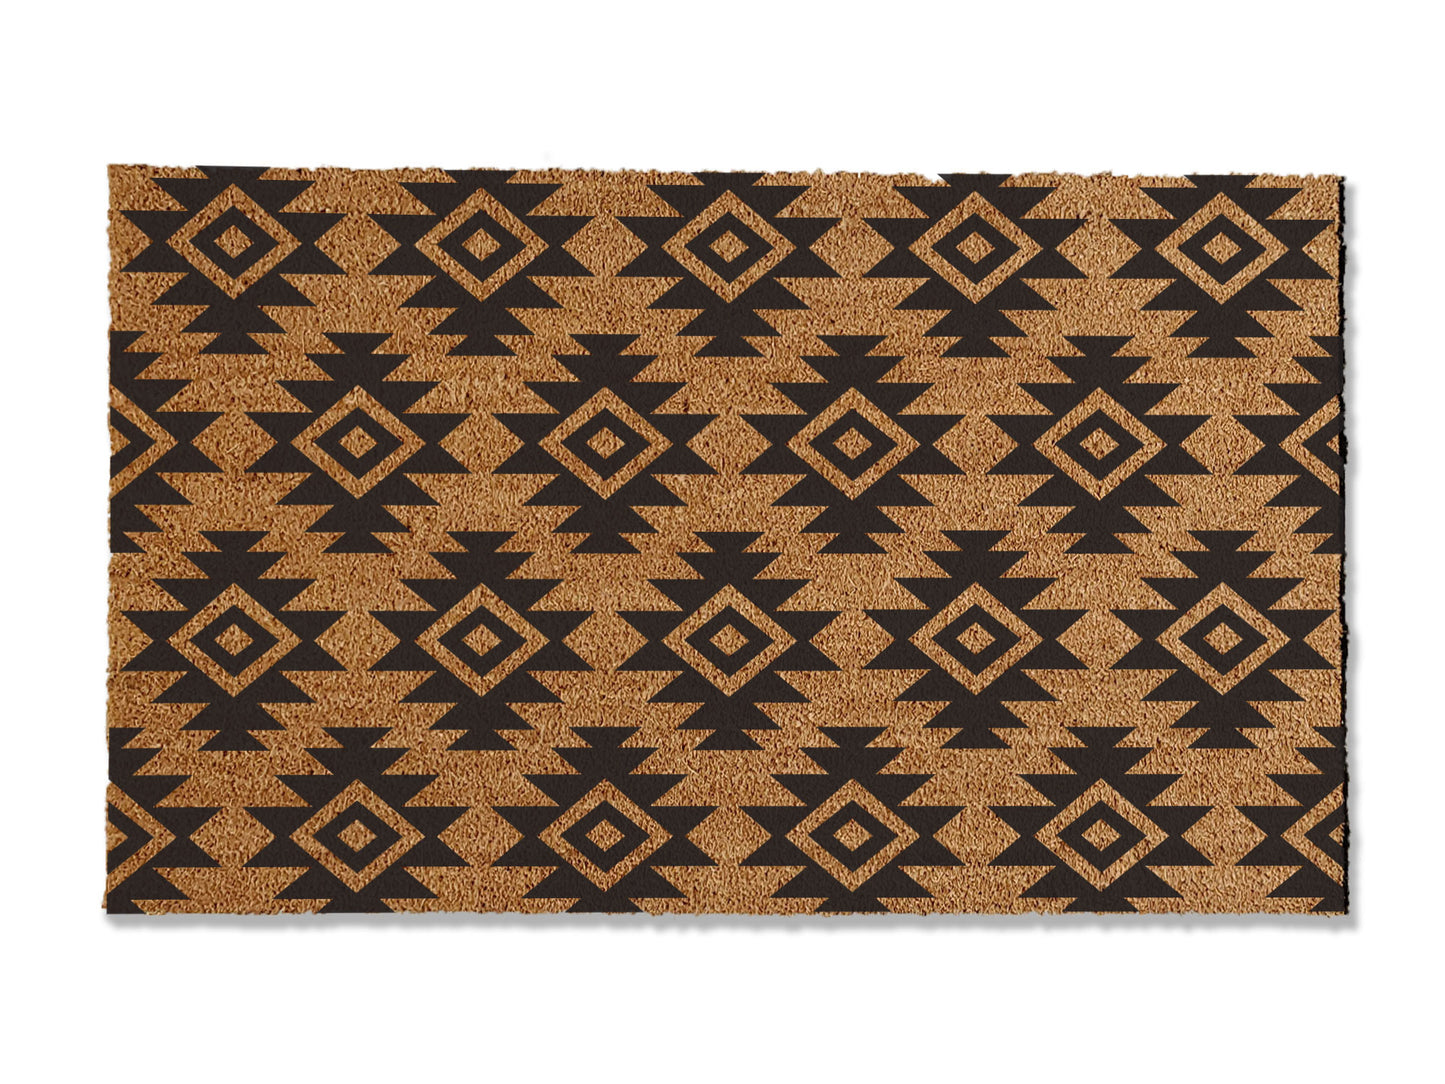 A coir doormat that is 36 inches by 60 inches and has a geometric aztec print painted on it.